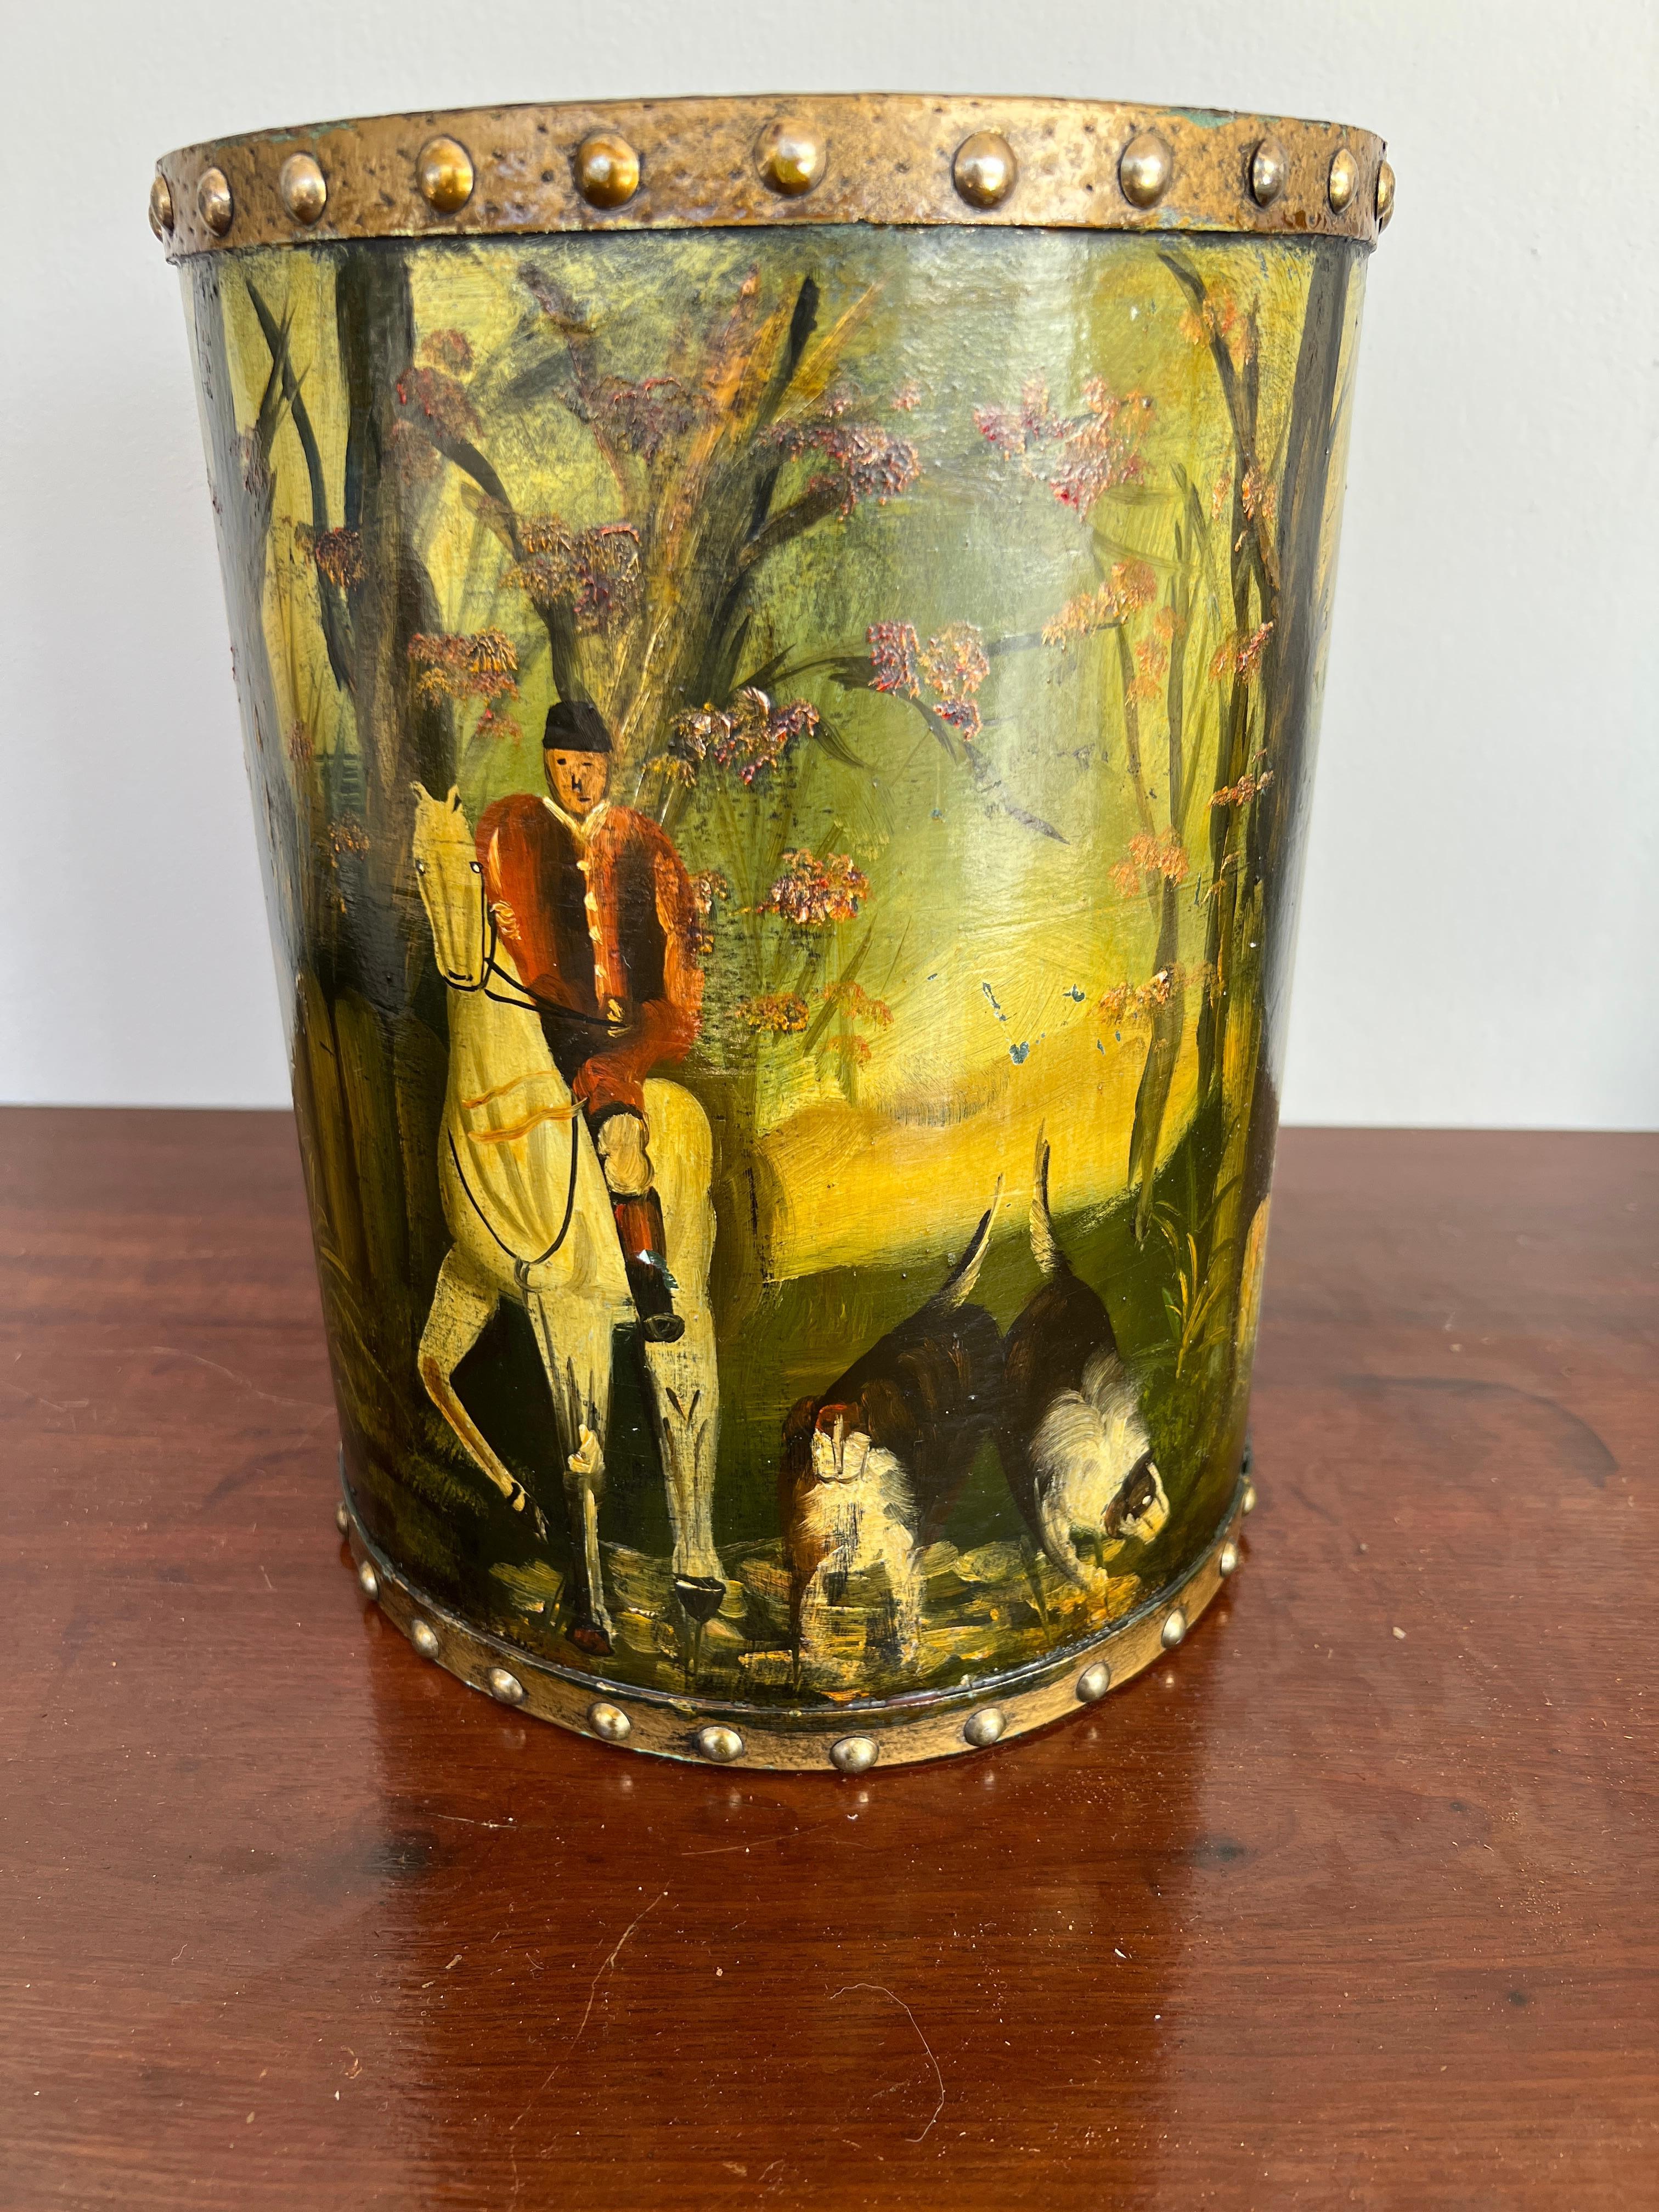 Italian, 20th century.

A vintage leather and paint decorated trash can or waste bin hand painted with equestrian themed hunting dog landscape. Likely originally had label to underside.